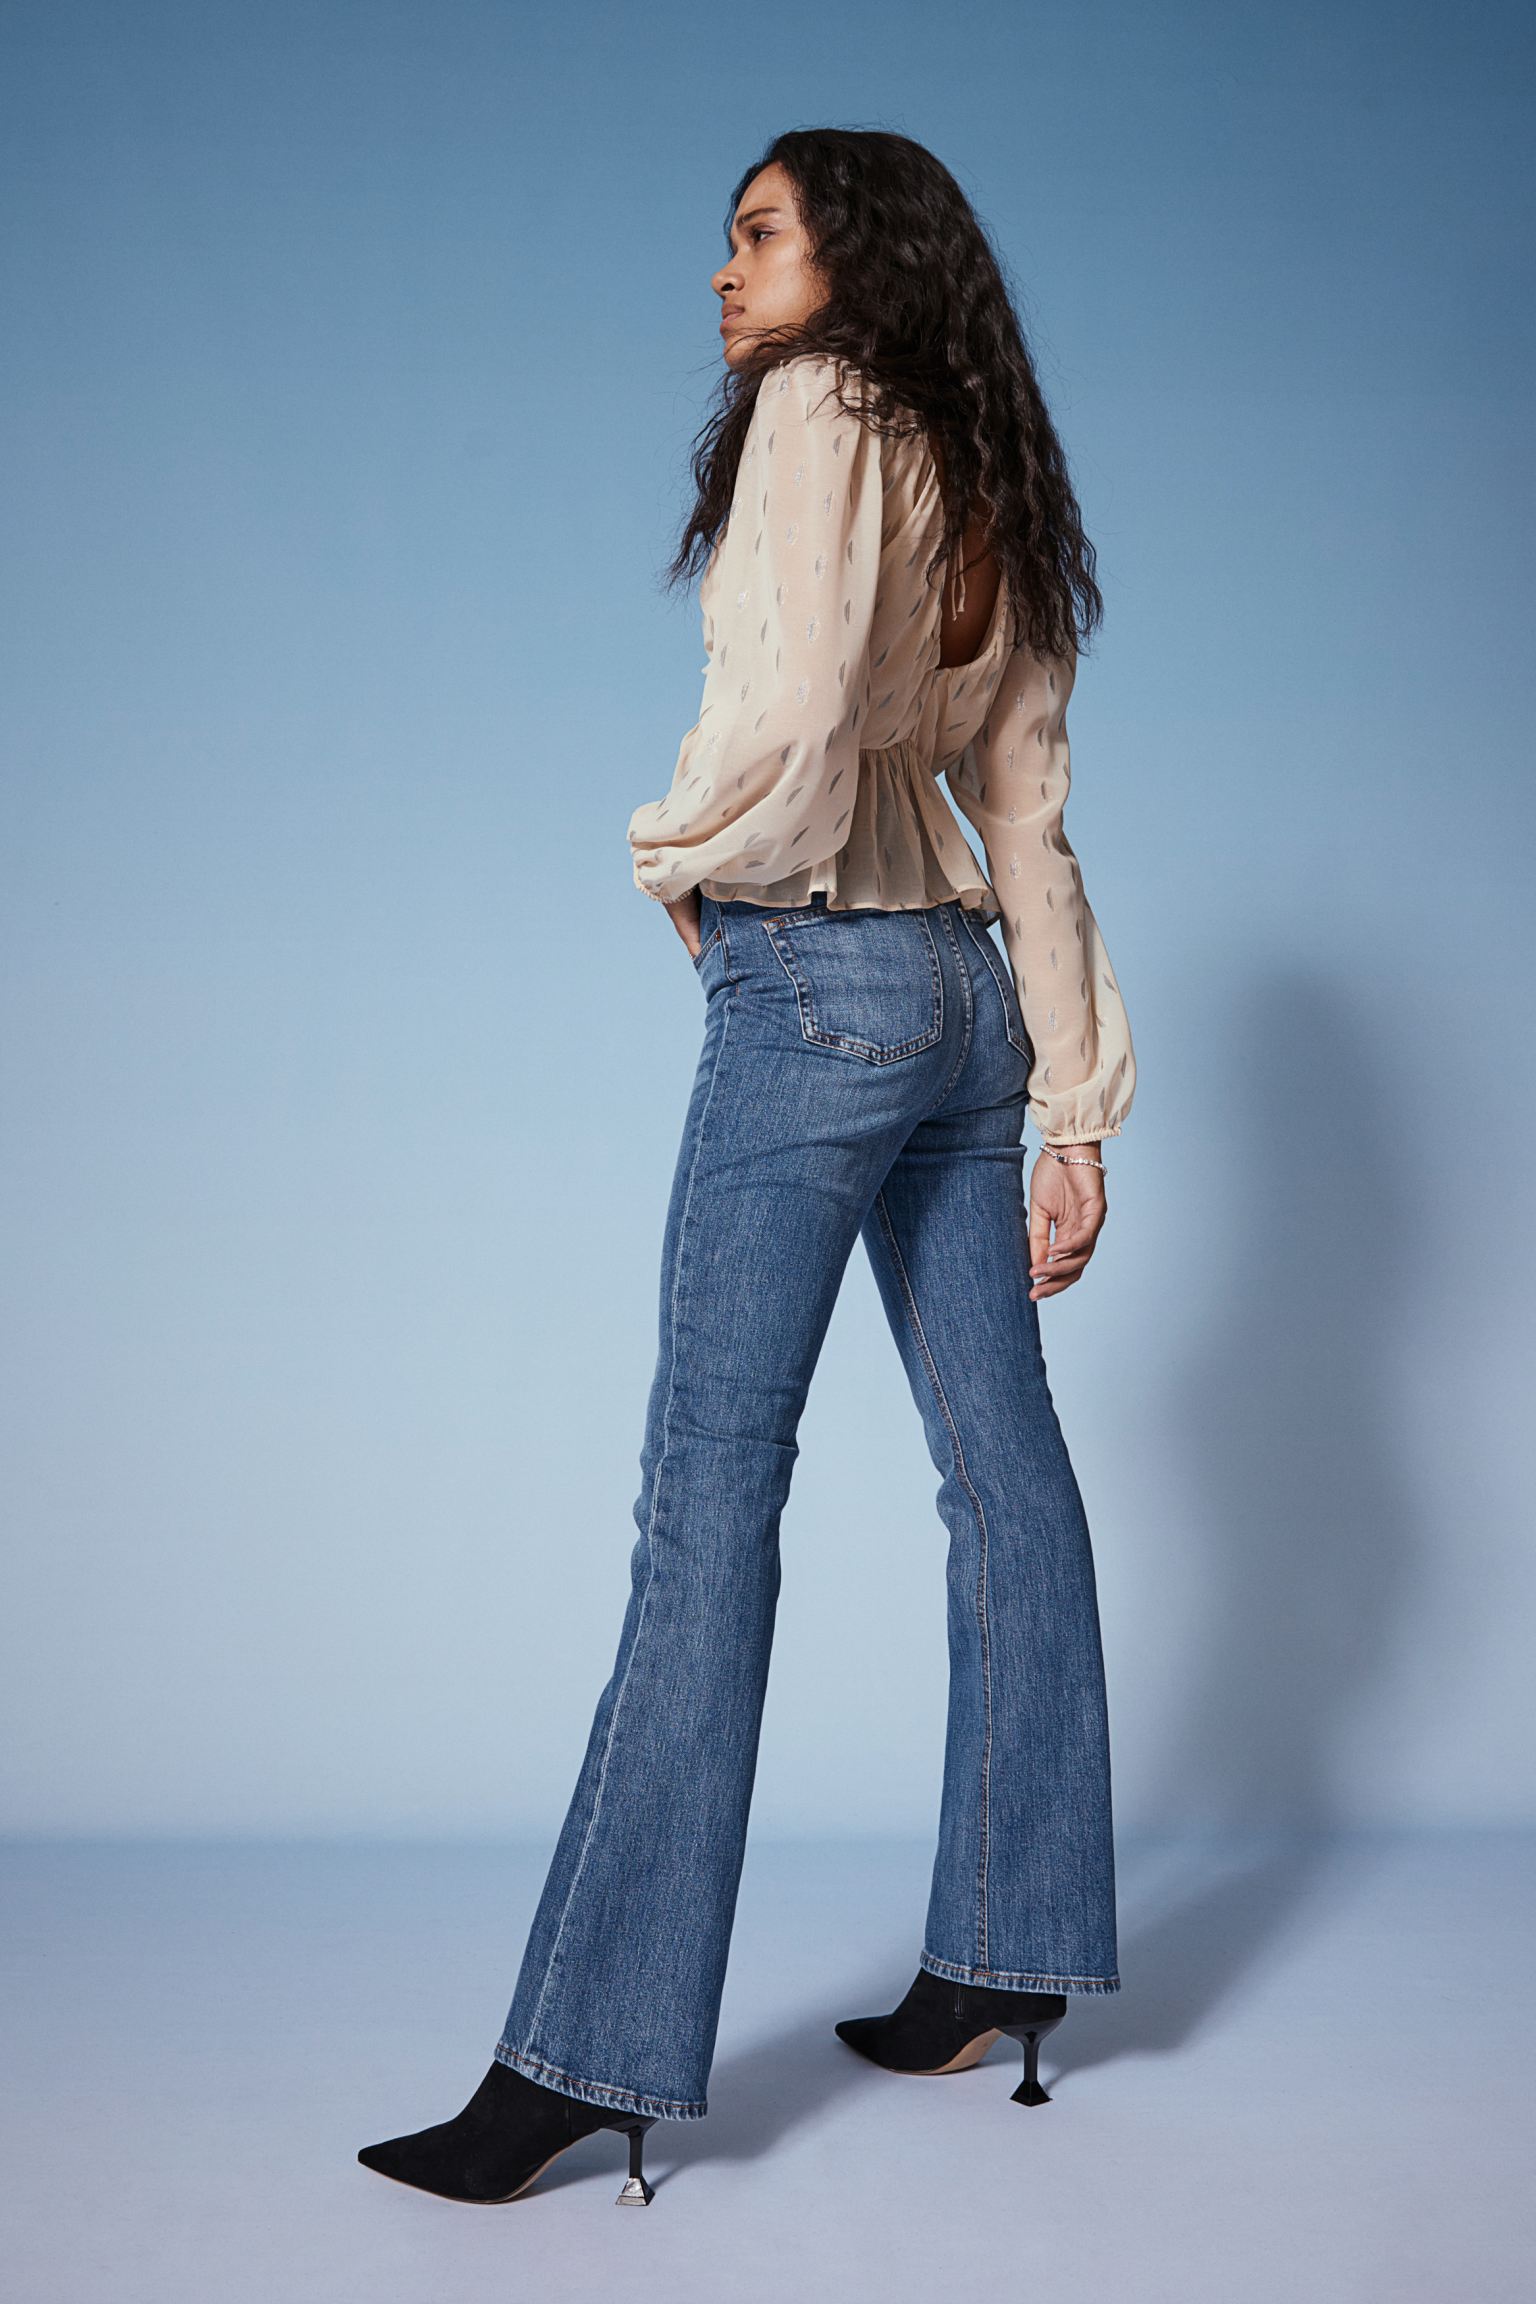 A model wearing a pair of blue flared jeans from H&M